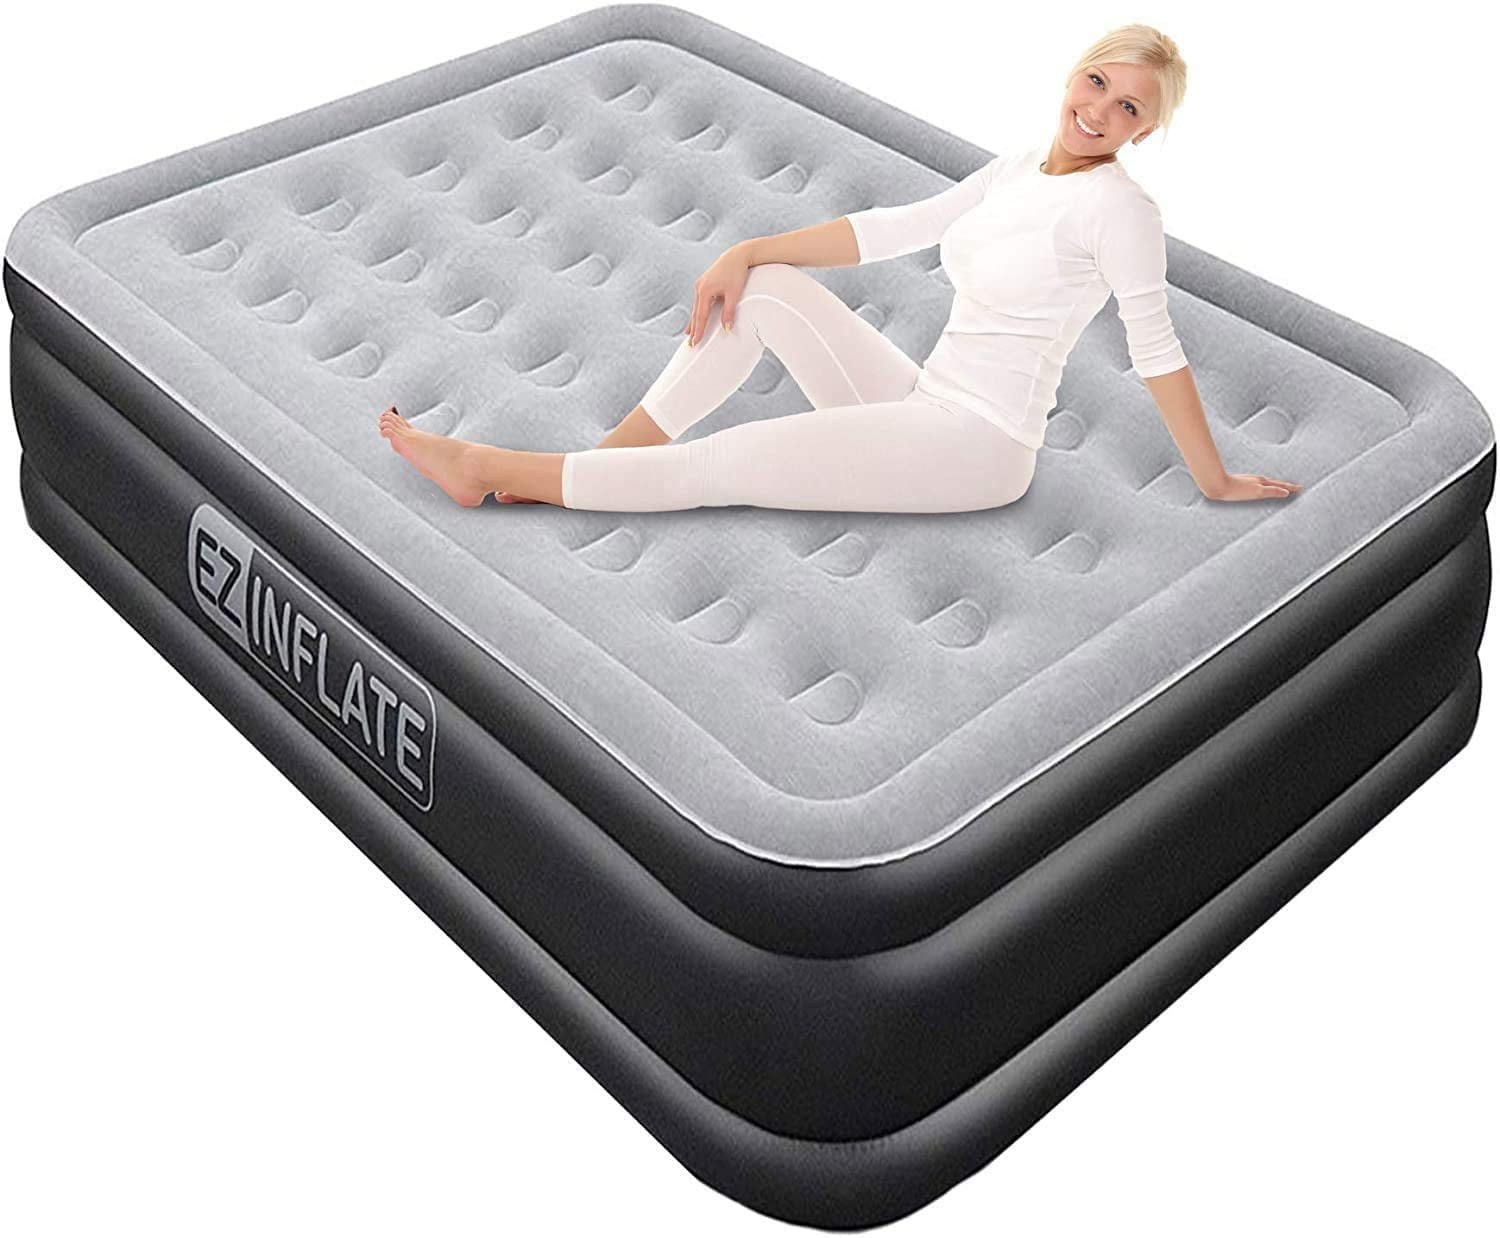 Double Airbed Mattress High Inflatable Electric Pump Blow Up Guest Air Bed New 